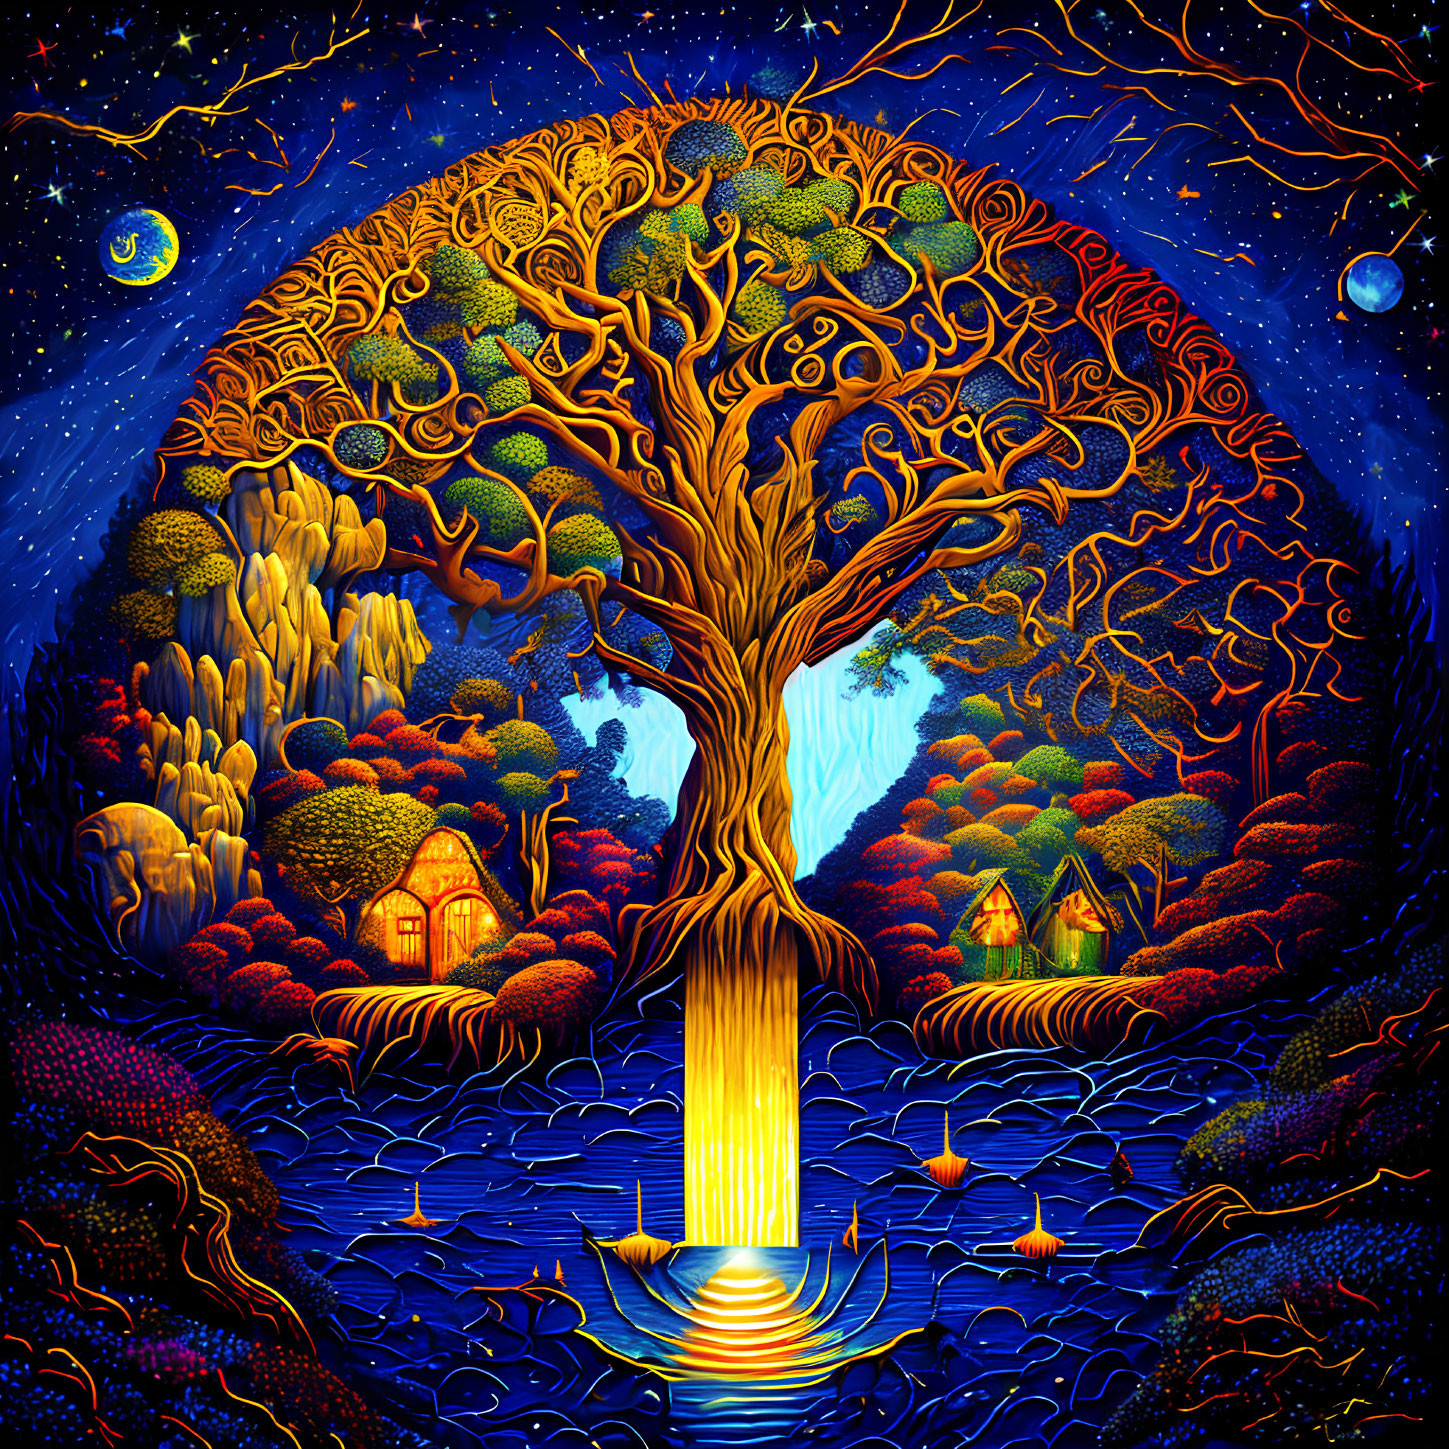 Colorful painting of mystical tree in night sky with glowing foliage, illuminated houses, and reflective river